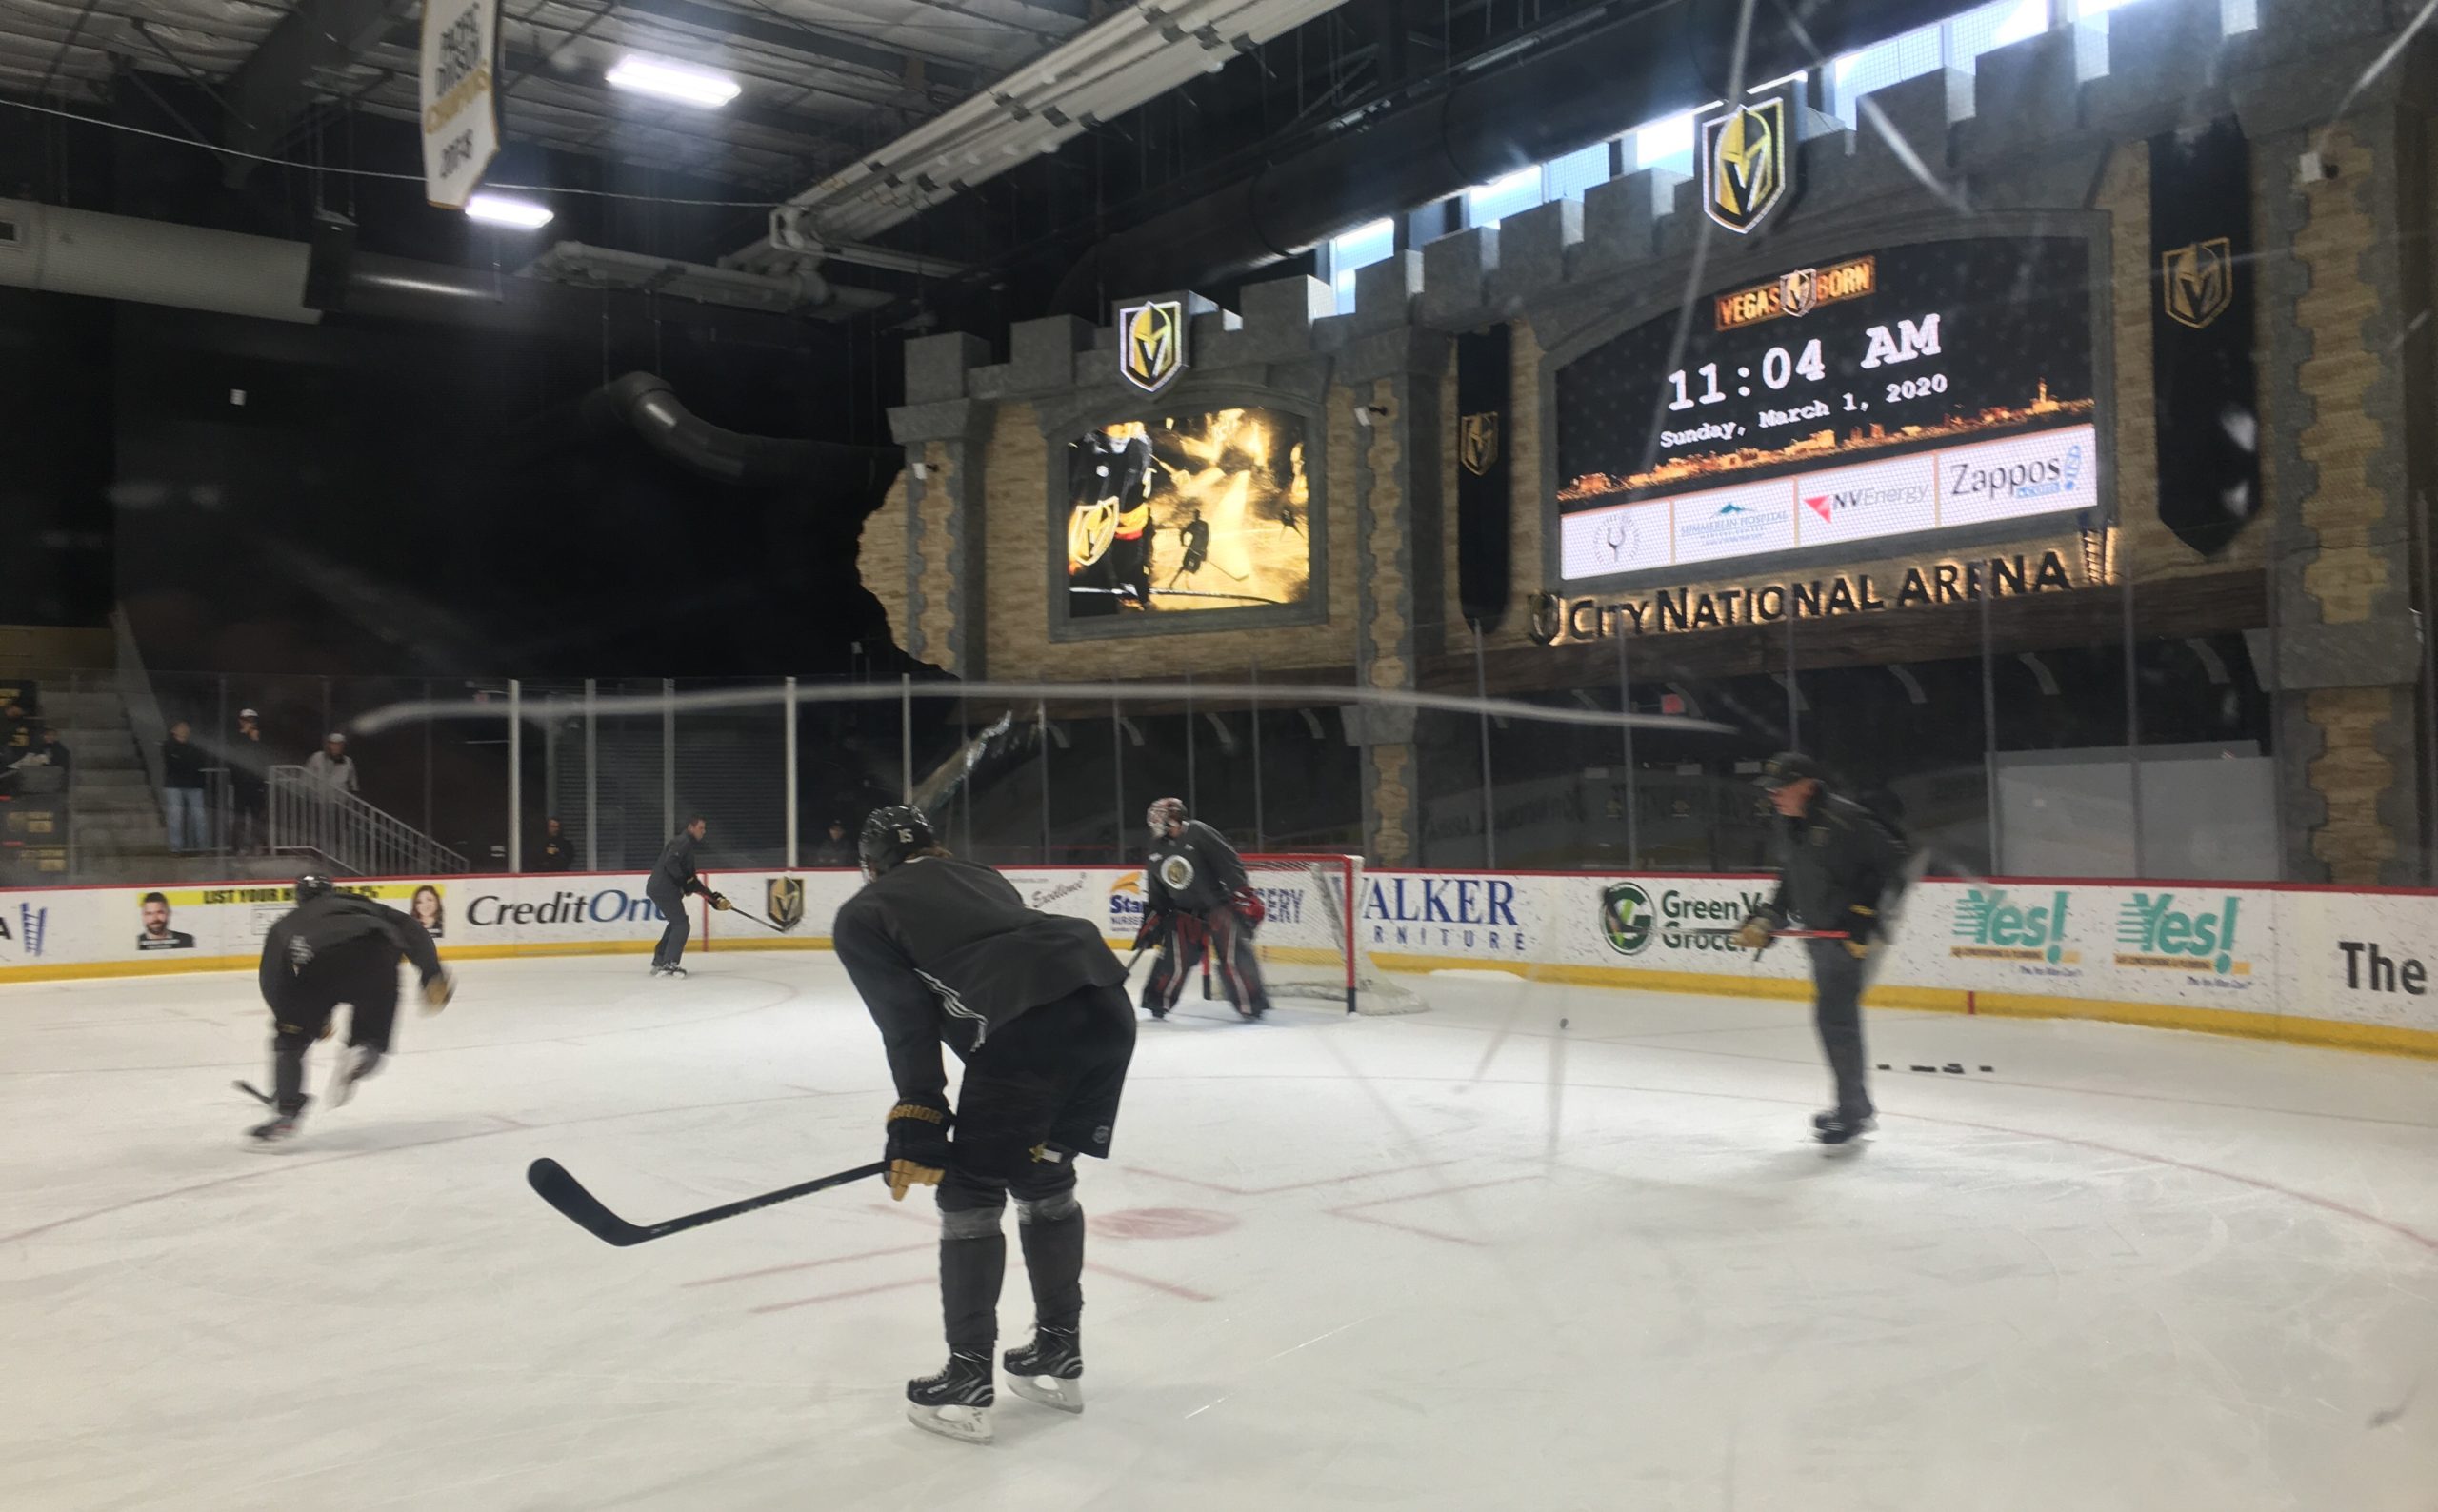 Golden Knights' City National Arena worth visit even in offseason